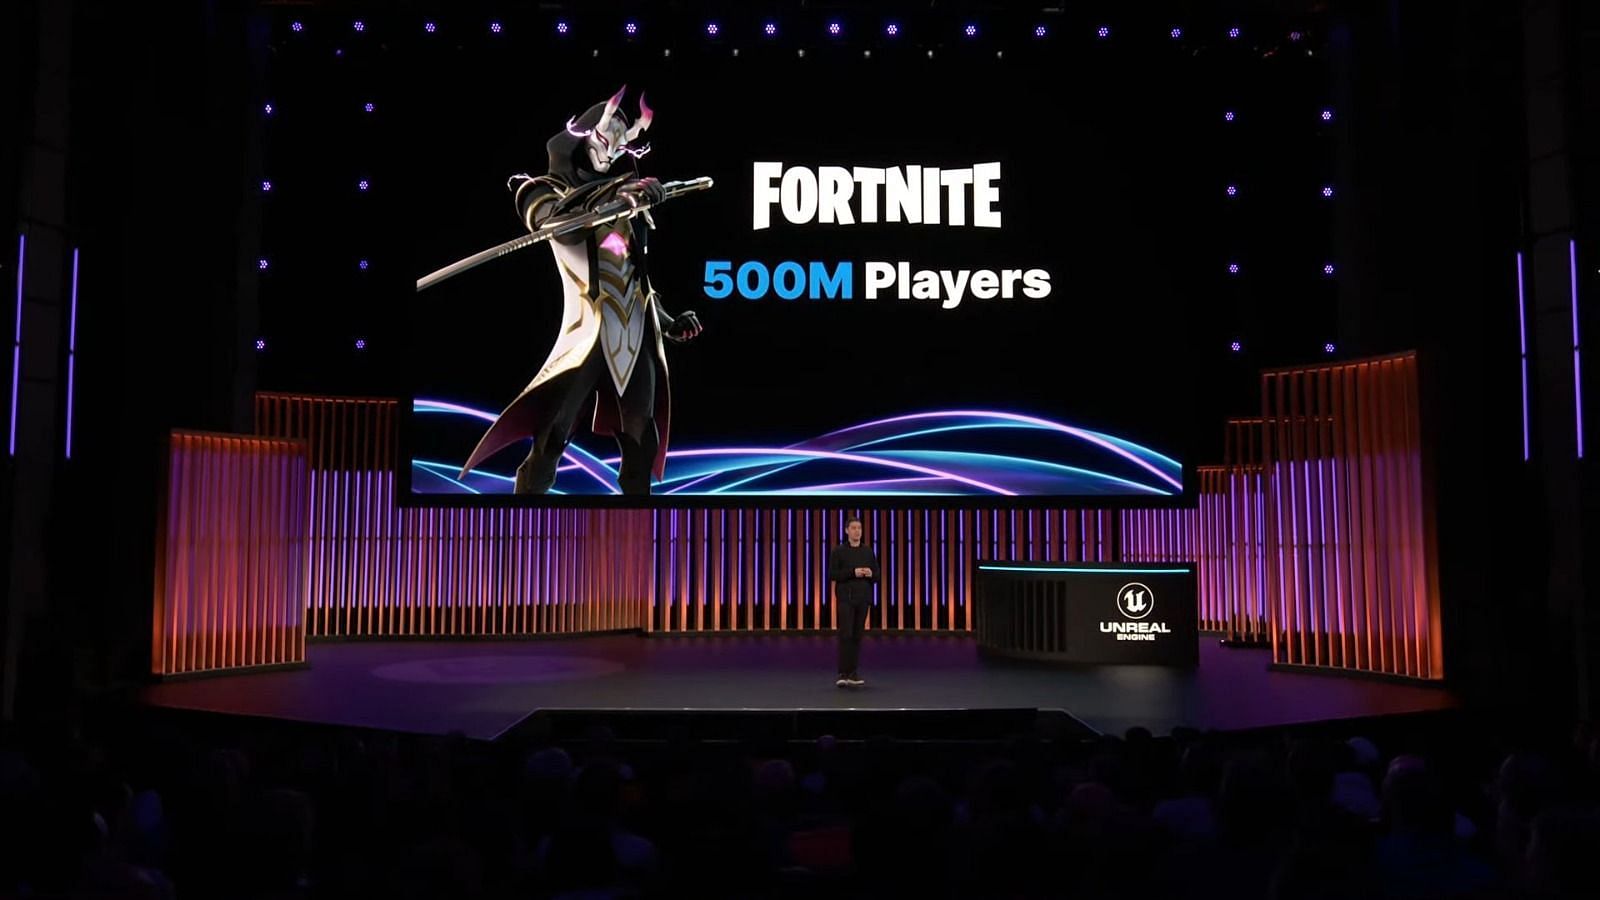 Fortnite reveals active and monthly player count during UFEN stream